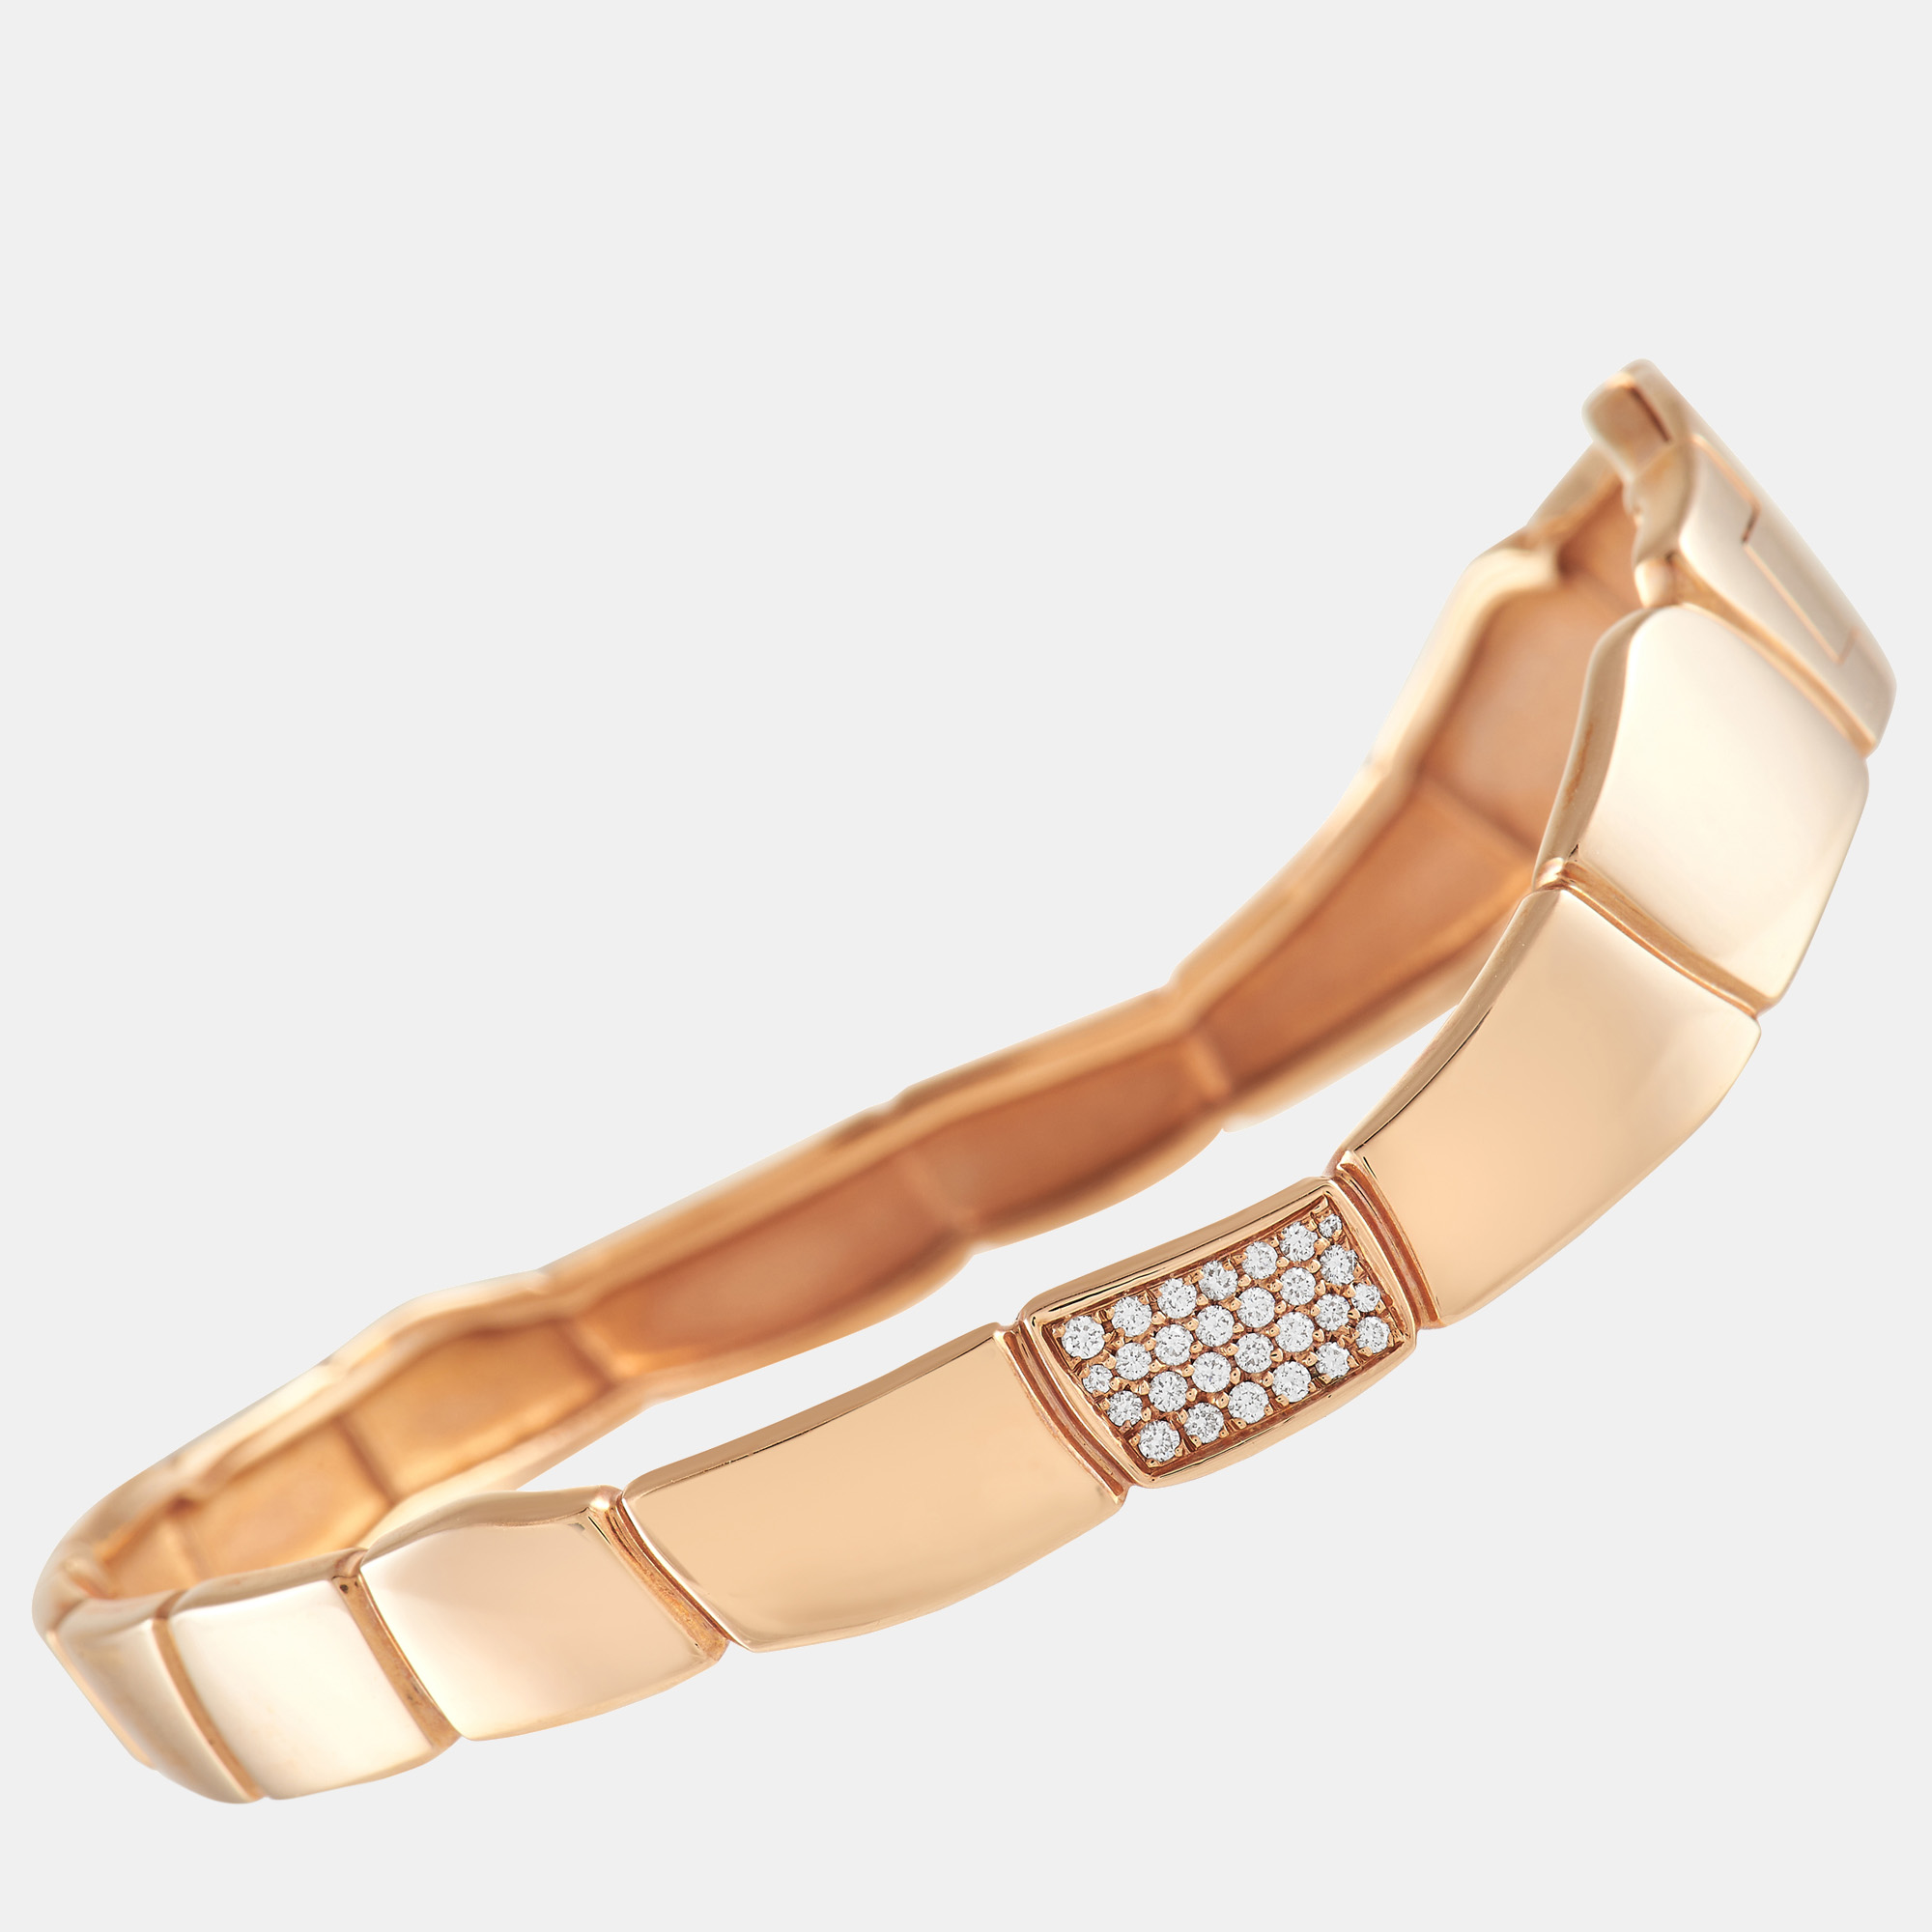 Pieces from the Hermes Niloticus collection draw inspiration from the sleek stylish forms that appear organically in nature. This exquisitely crafted Hermes bracelet features sleek links made from 18K Rose Gold which come together in a beautifully curved design. At the center a rectangular cluster of diamonds add the perfect amount of sparkle.